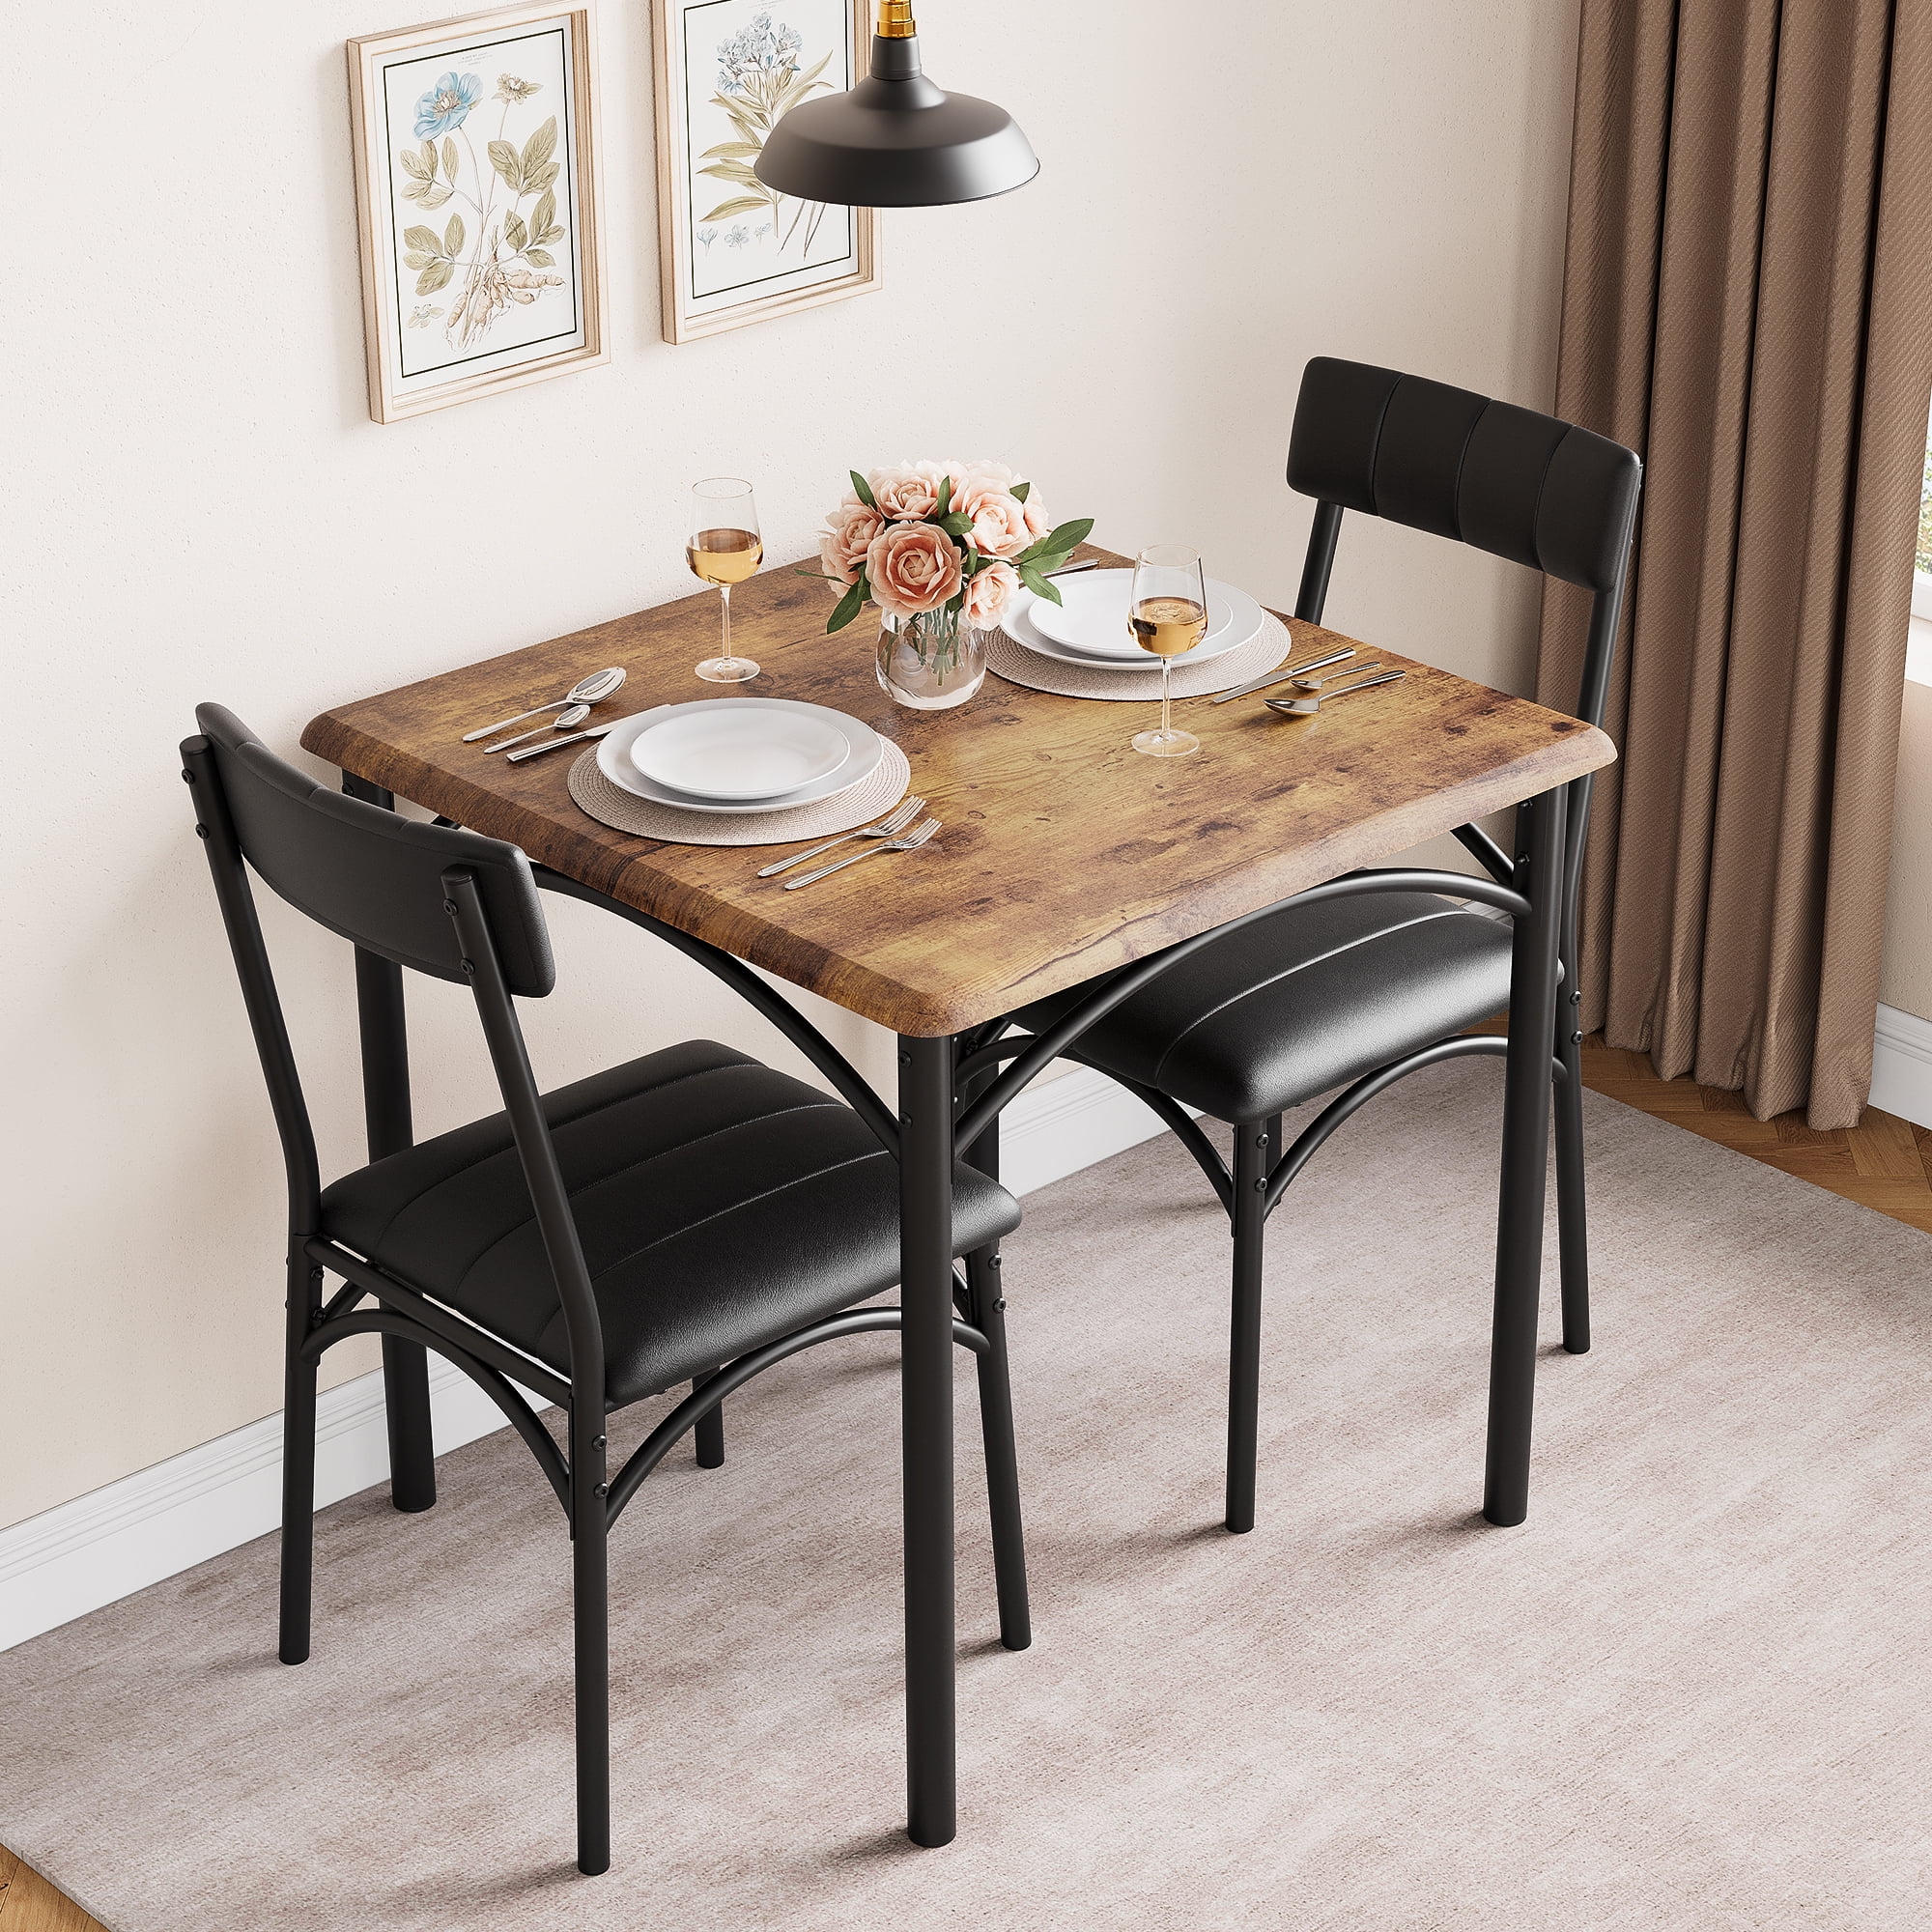 Hosslly 3 Piece Dining Table Sets With